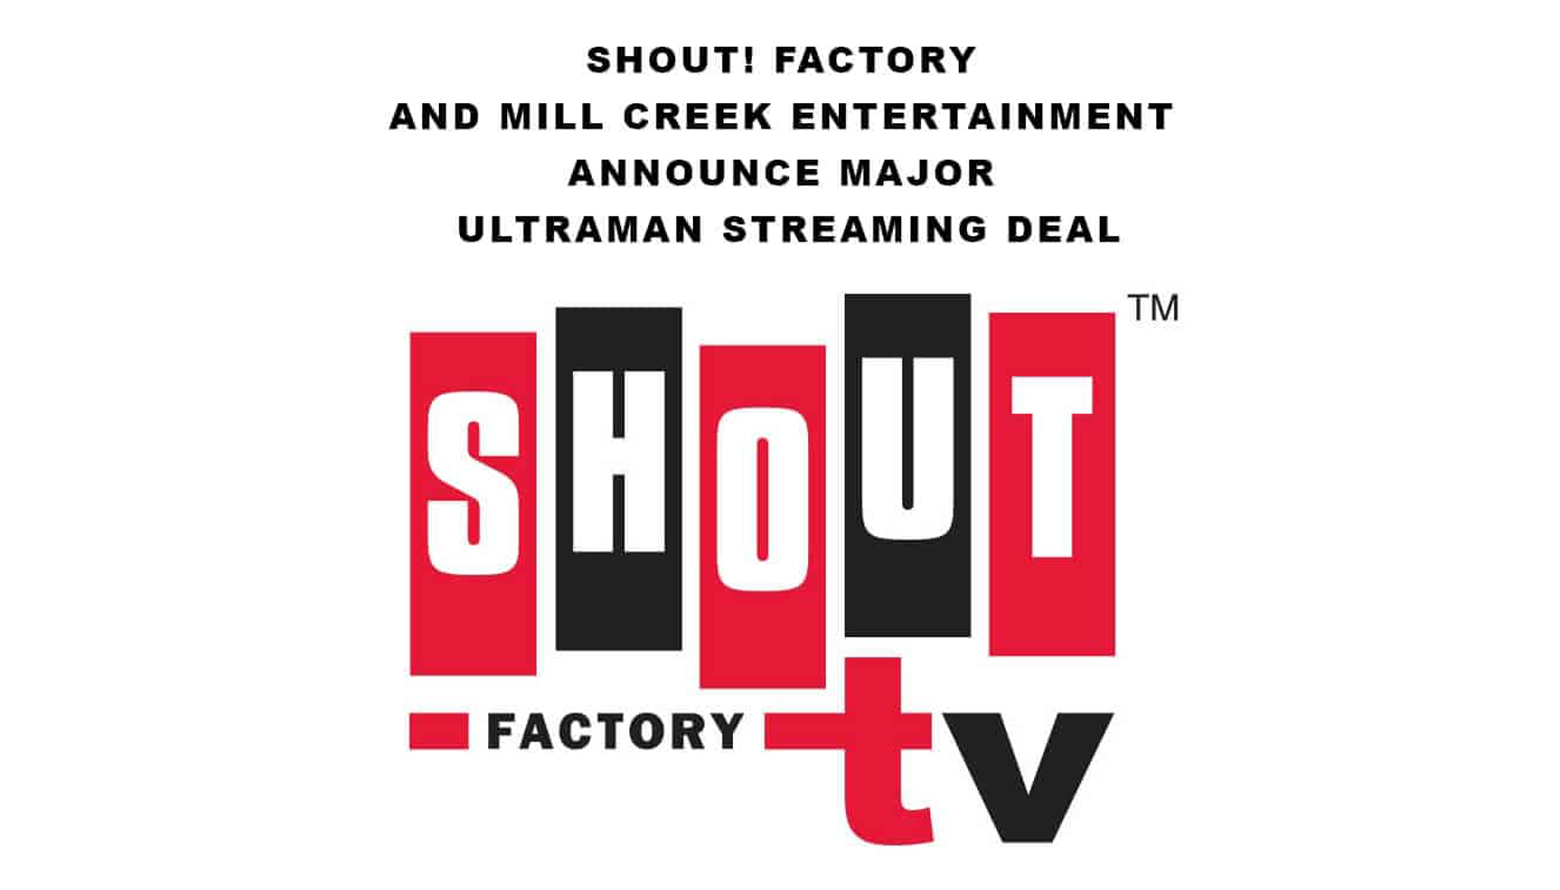 SHOUT! FACTORY AND MILL CREEK ENTERTAINMENT  ANNOUNCE MAJOR ULTRAMAN STREAMING DEAL